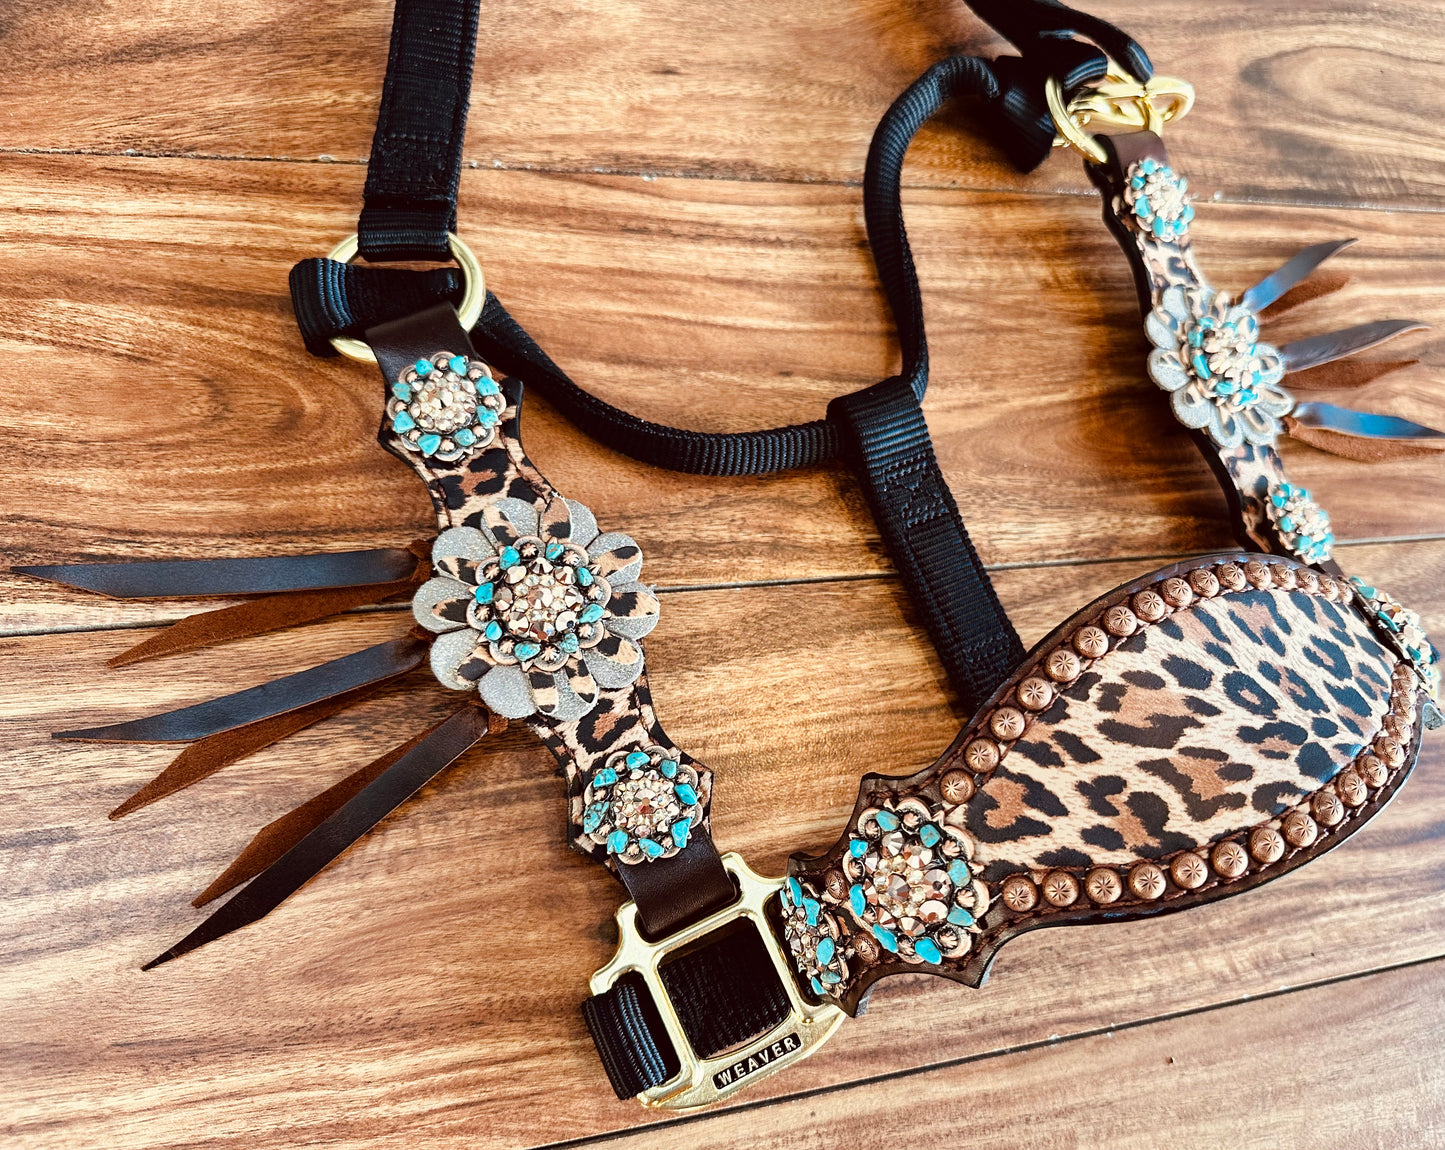 Cheetah with leather flowers